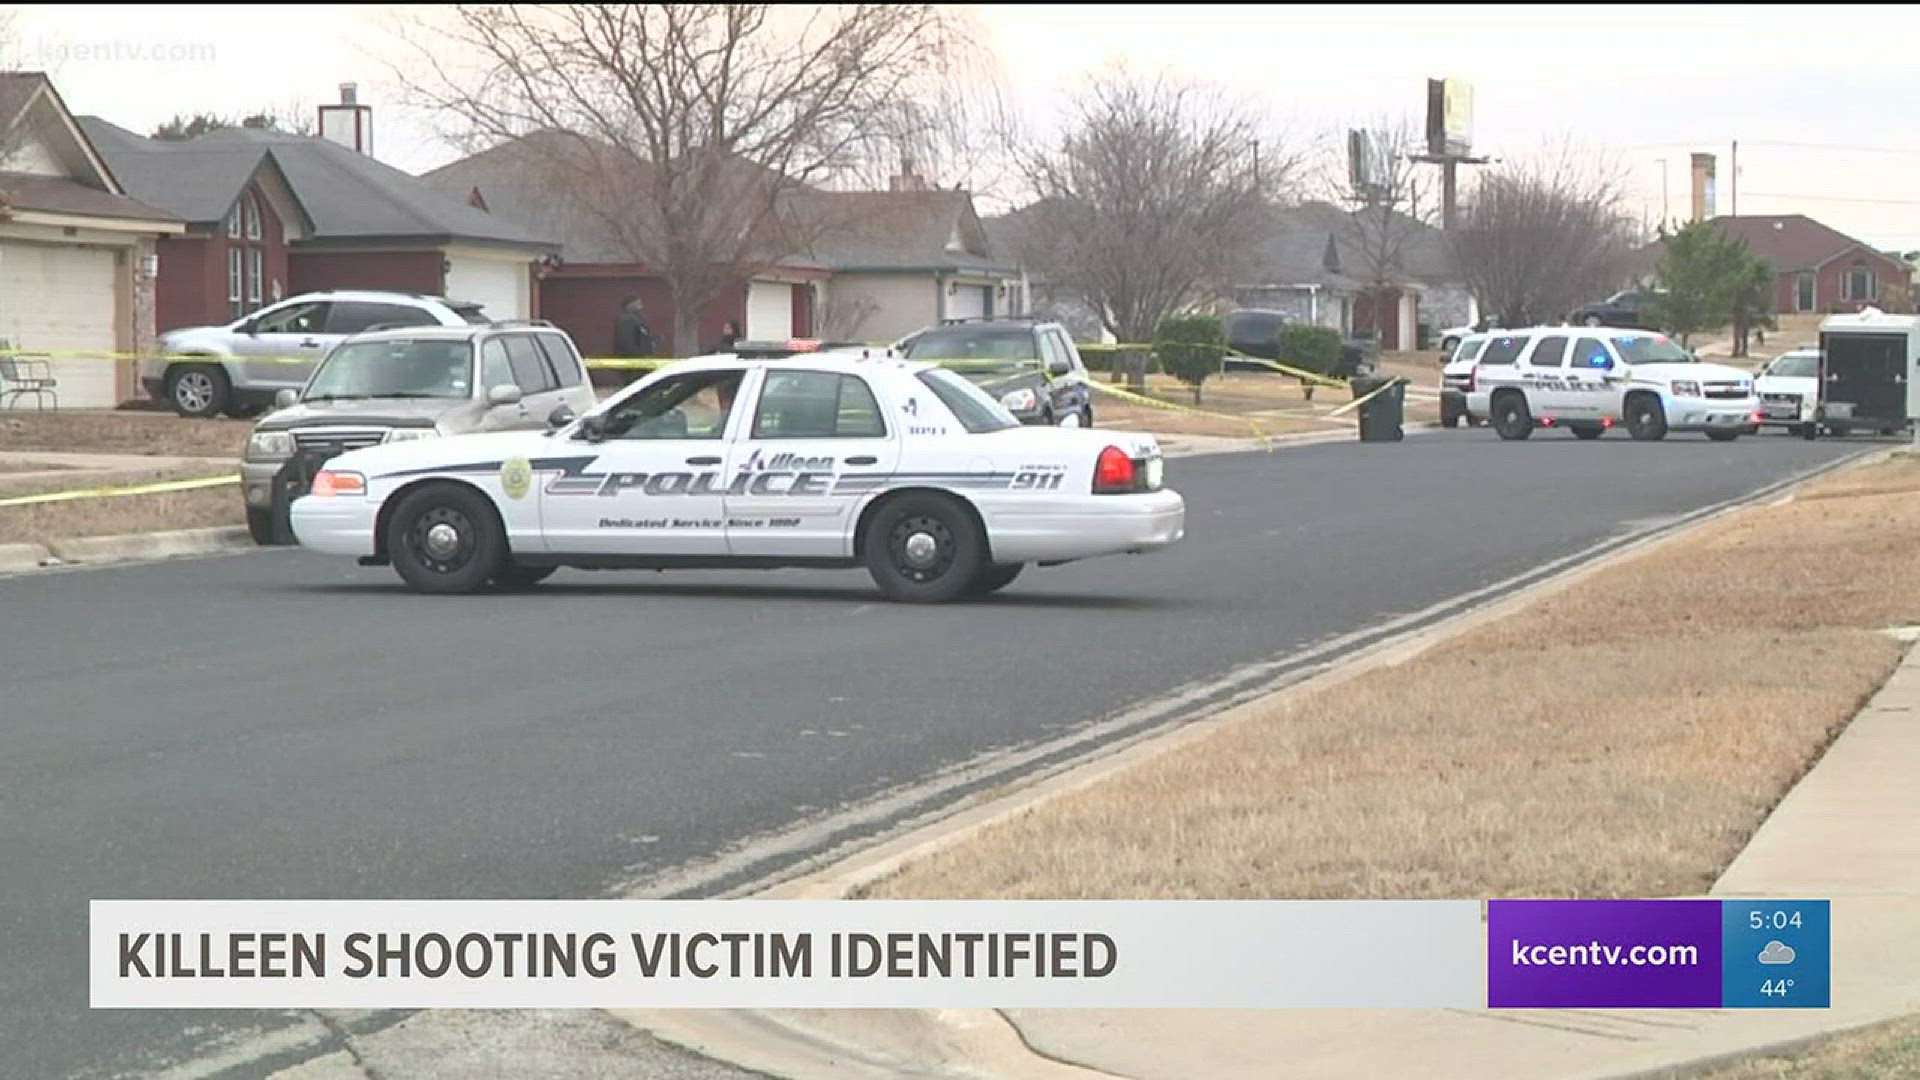 The man who was shot and killed by a homeowner in Killeen last week has been identified.